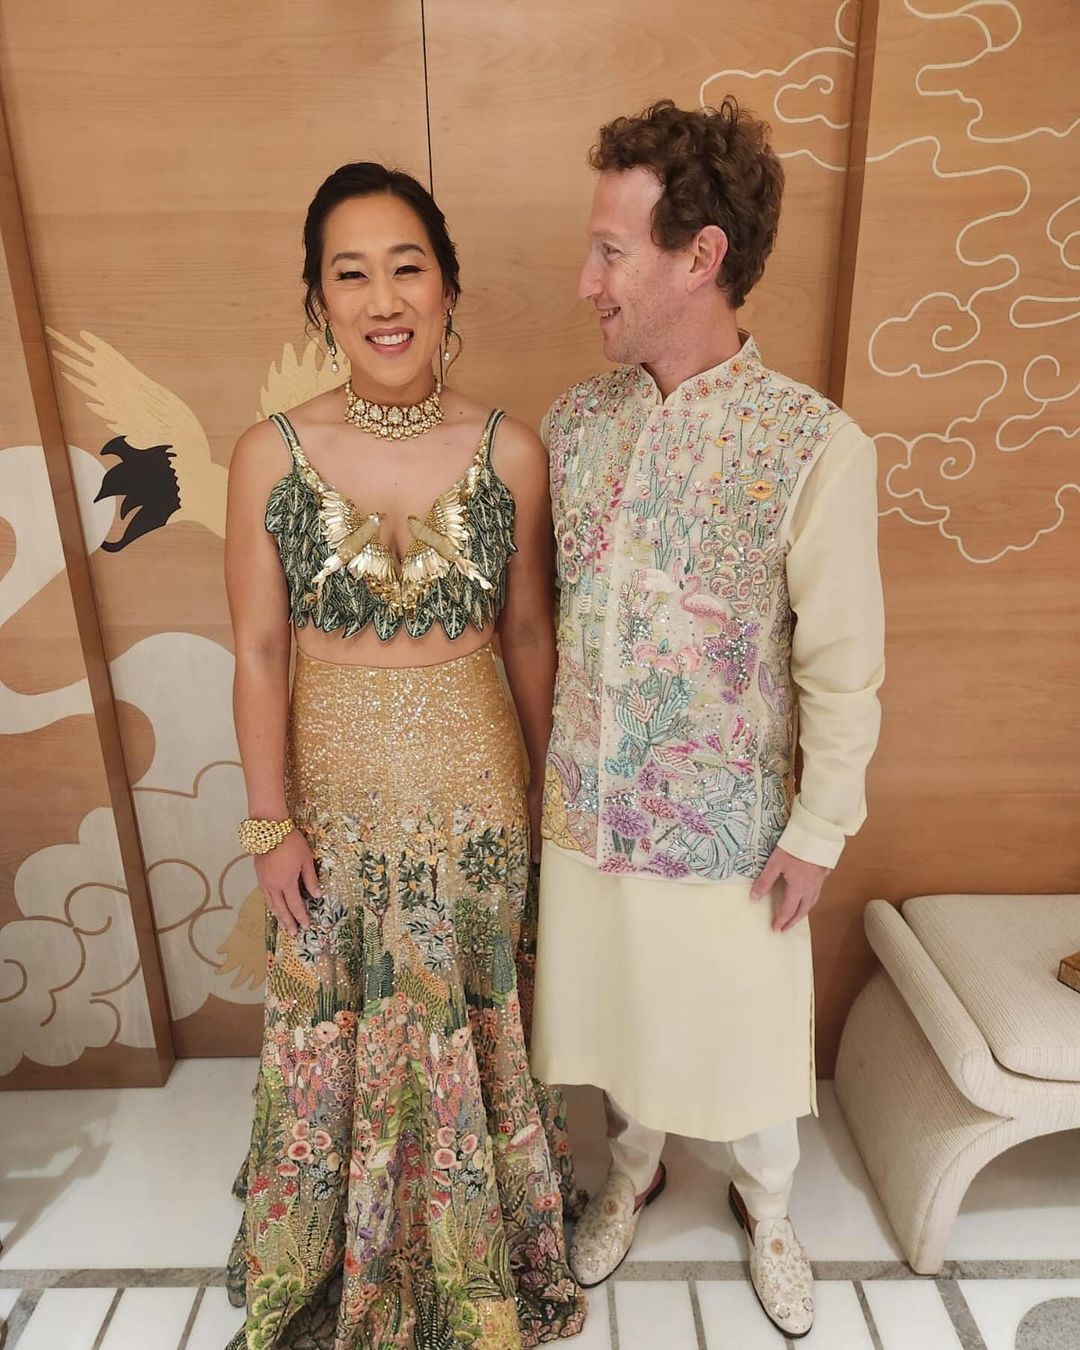 Facebook boss Mark Zuckerberg and his wife attracted attention at a $120 million wedding party - Photo 4.